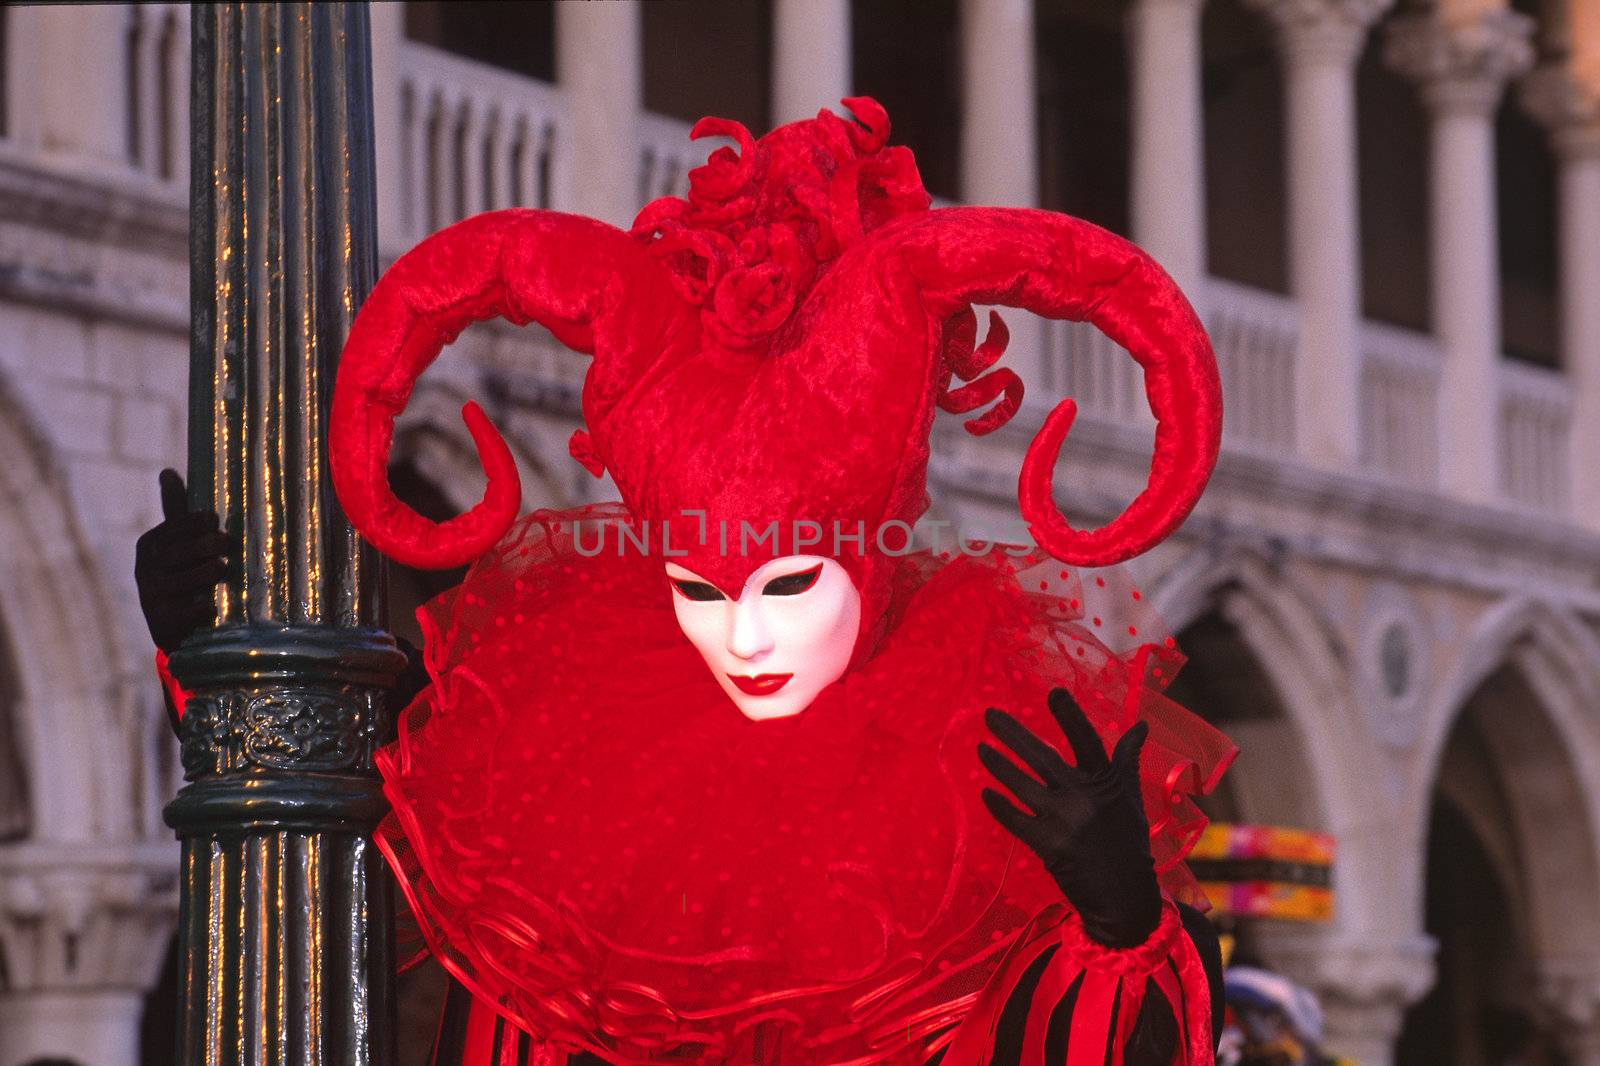 Carnival in Venice, Mask 104b by Natureandmore